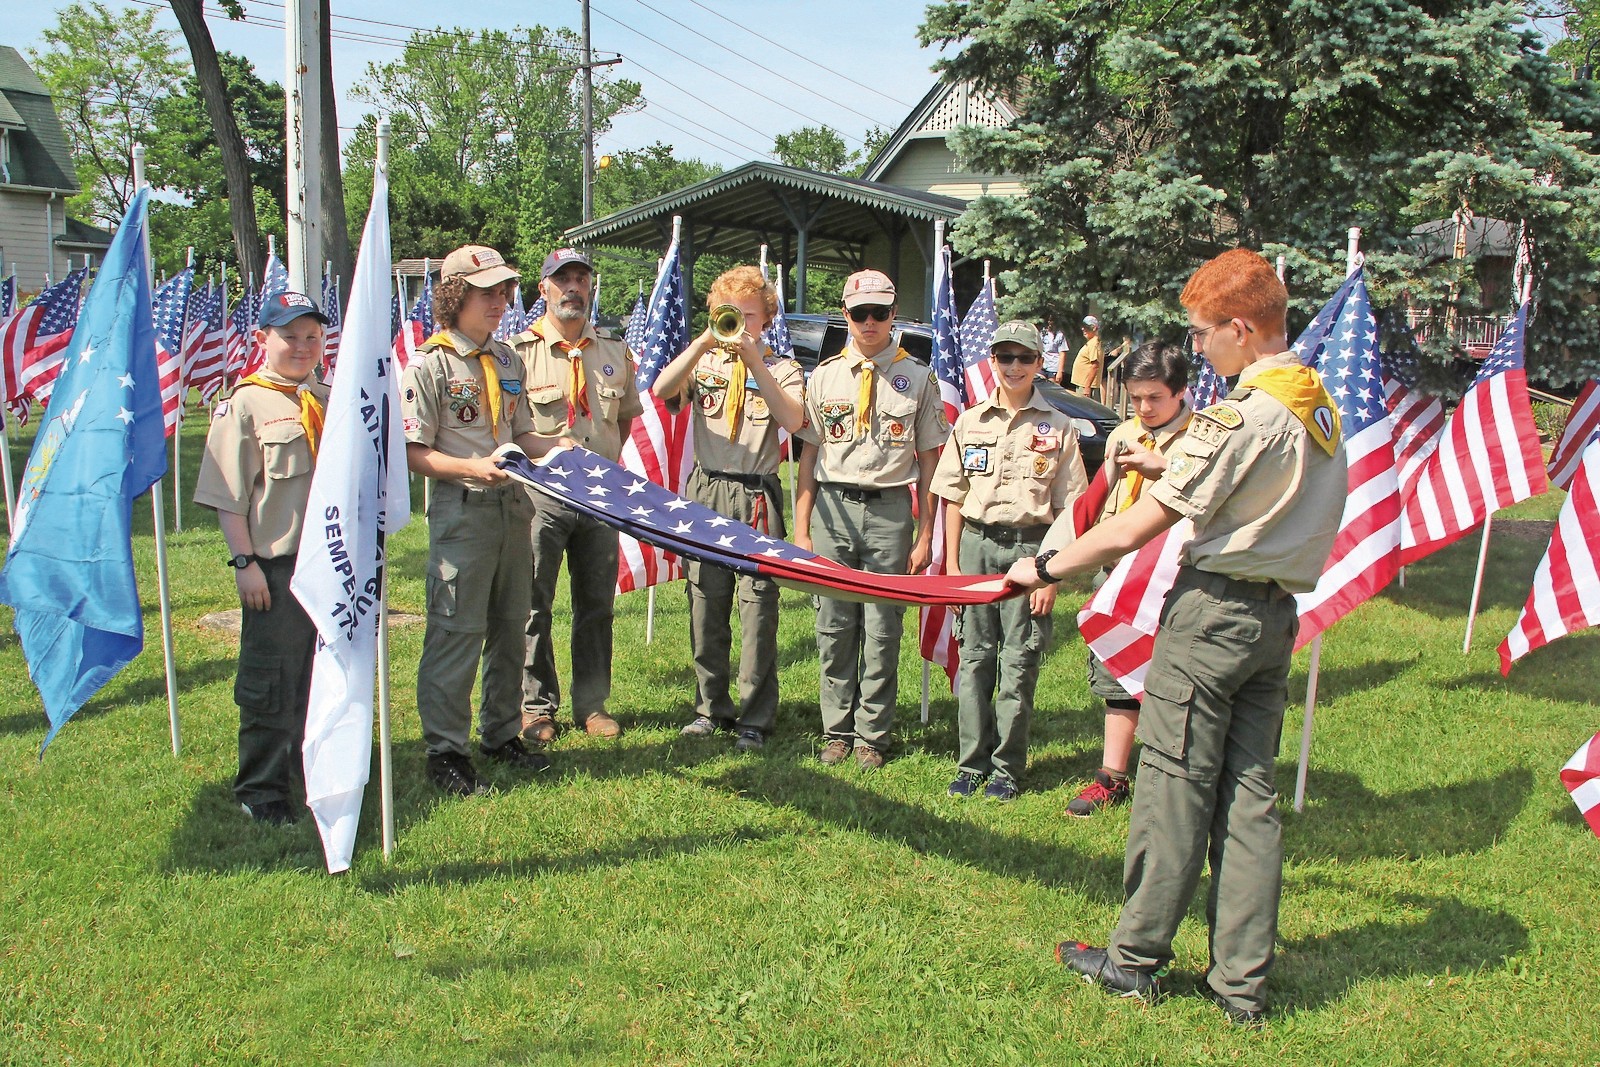 Troop 656 Boy Scouts, from left, John Metress, Matt Seaman, Luke Benedetto, James Seaman and Peter Rowan prepared the American Flag as the second annual Field of Honor was dedicated at the Wantagh Museum on May 29.